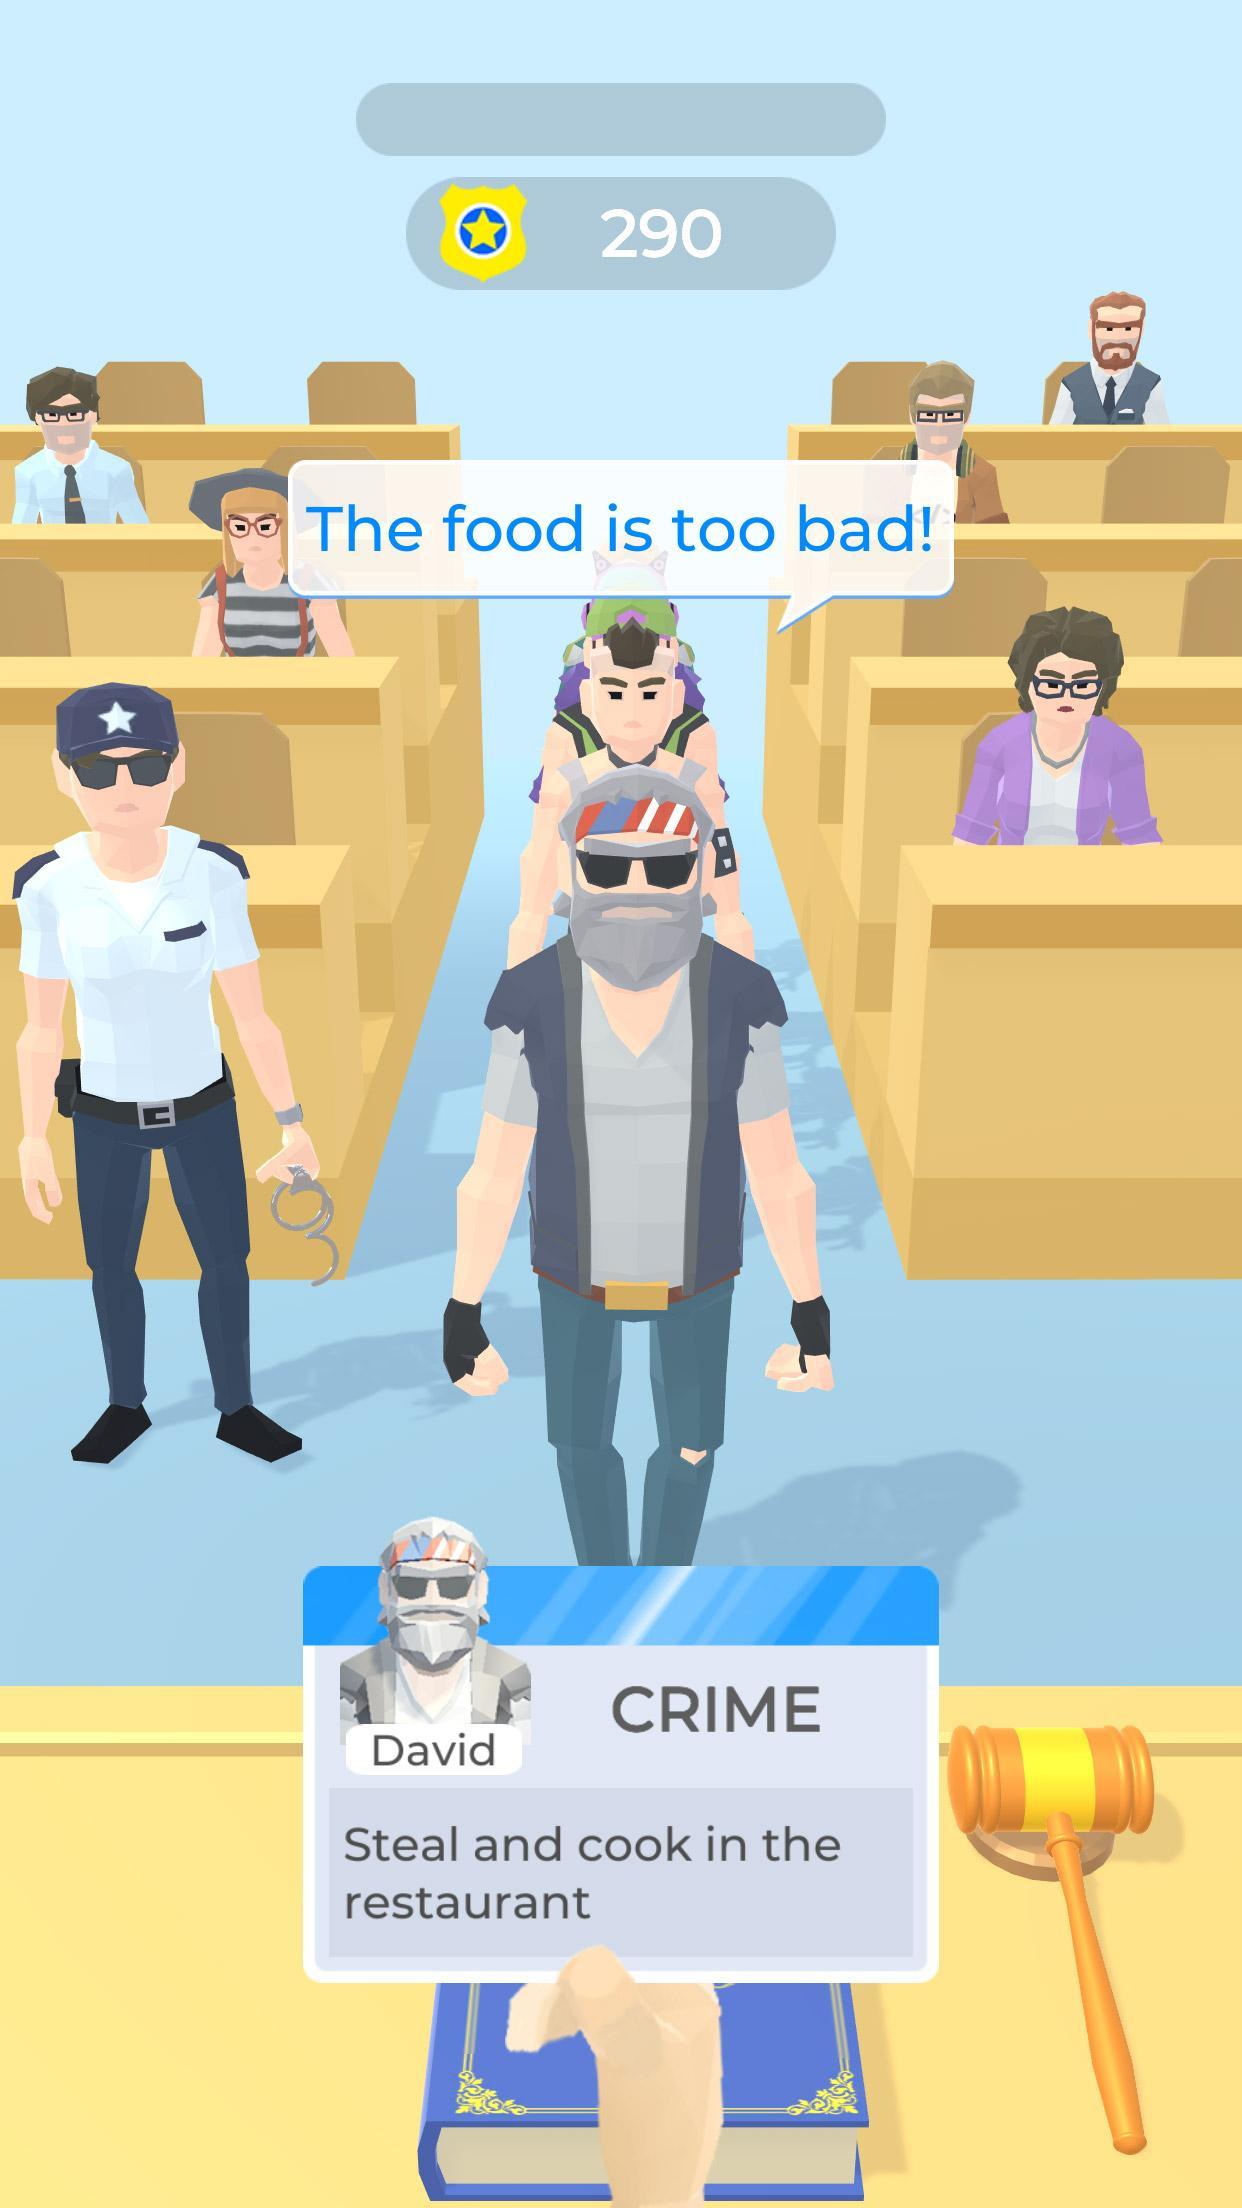 Guilty Or Not Guilty For Android Apk Download